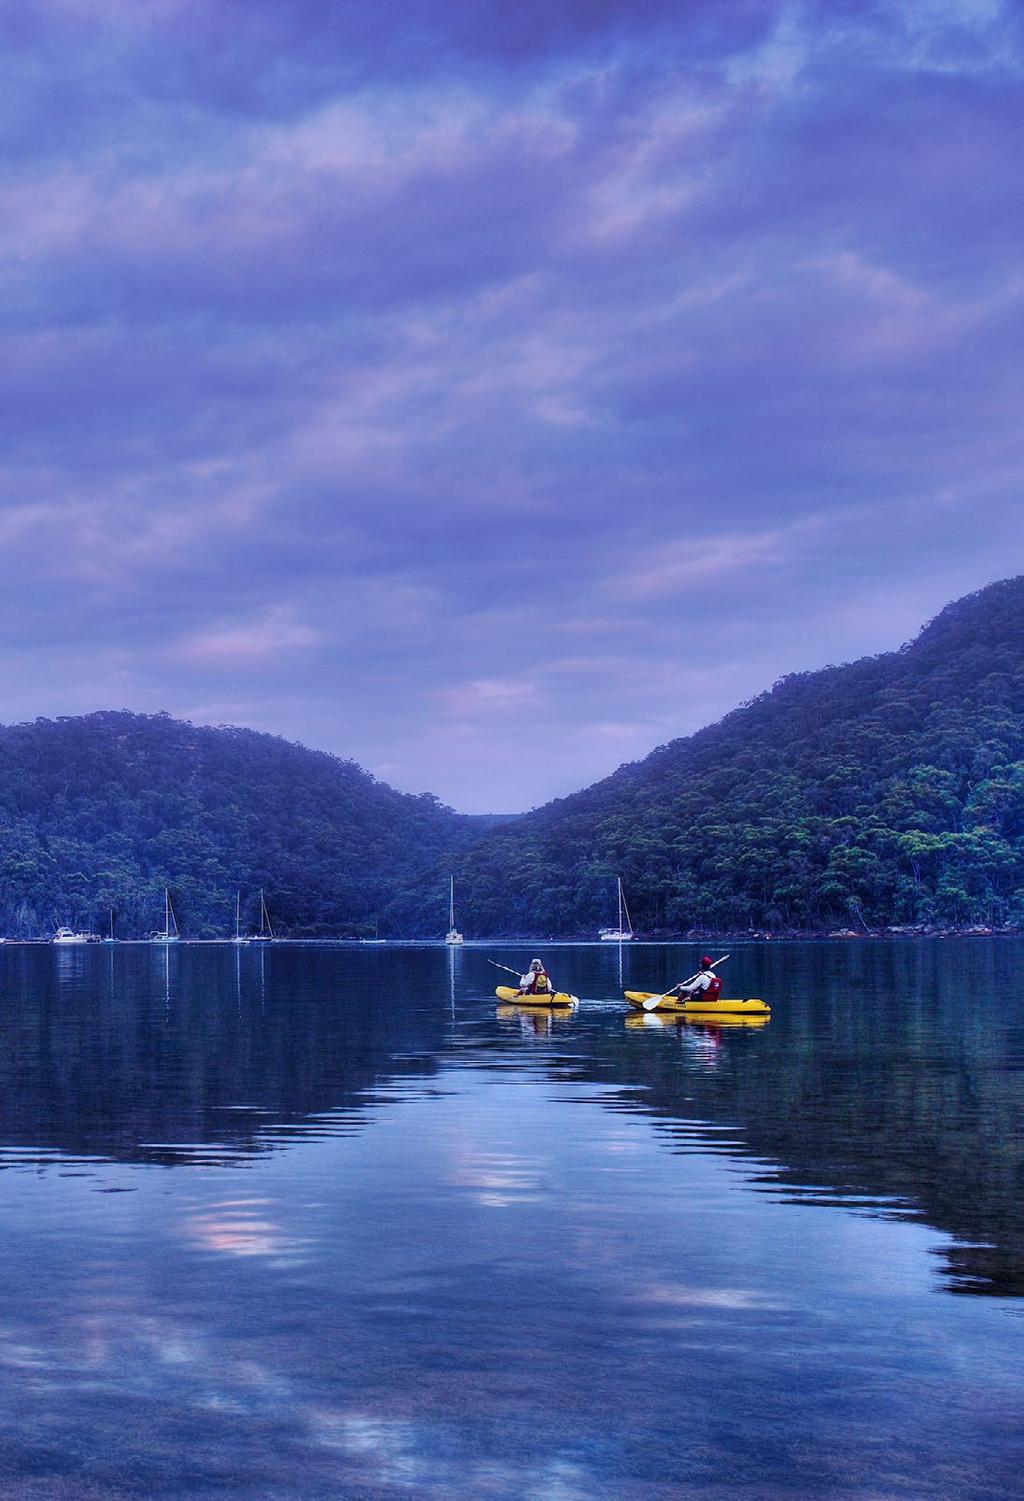 PITTWATER YHA BUDGET GROUP ACCOMMODATION 2018 Located within Kur-ring-gai Chase National Park, overlooking